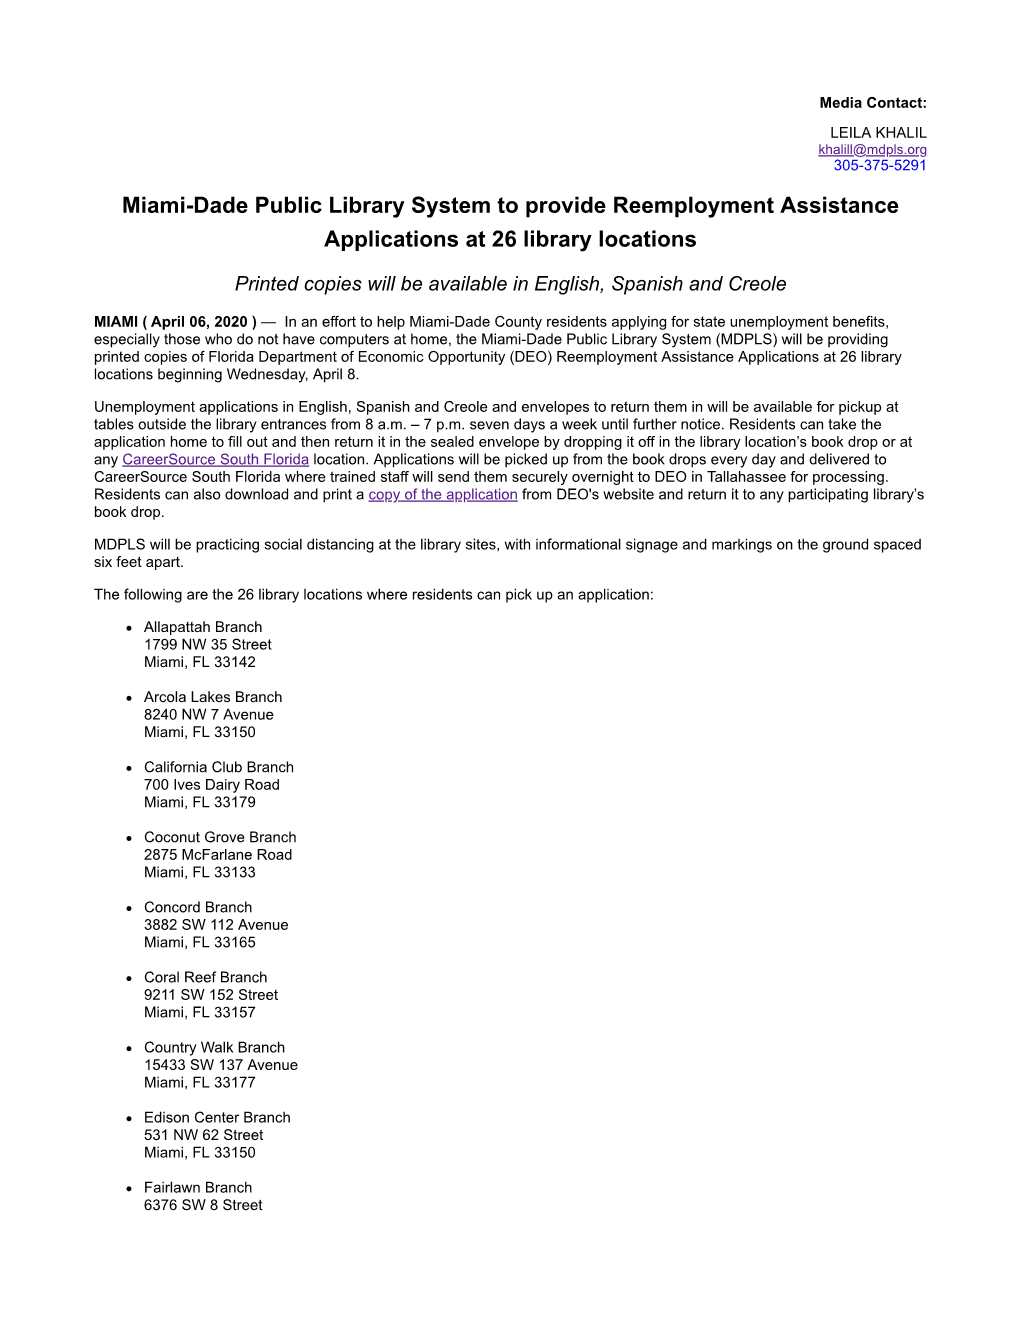 Miami-Dade Public Library System to Provide Reemployment Assistance Applications at 26 Library Locations